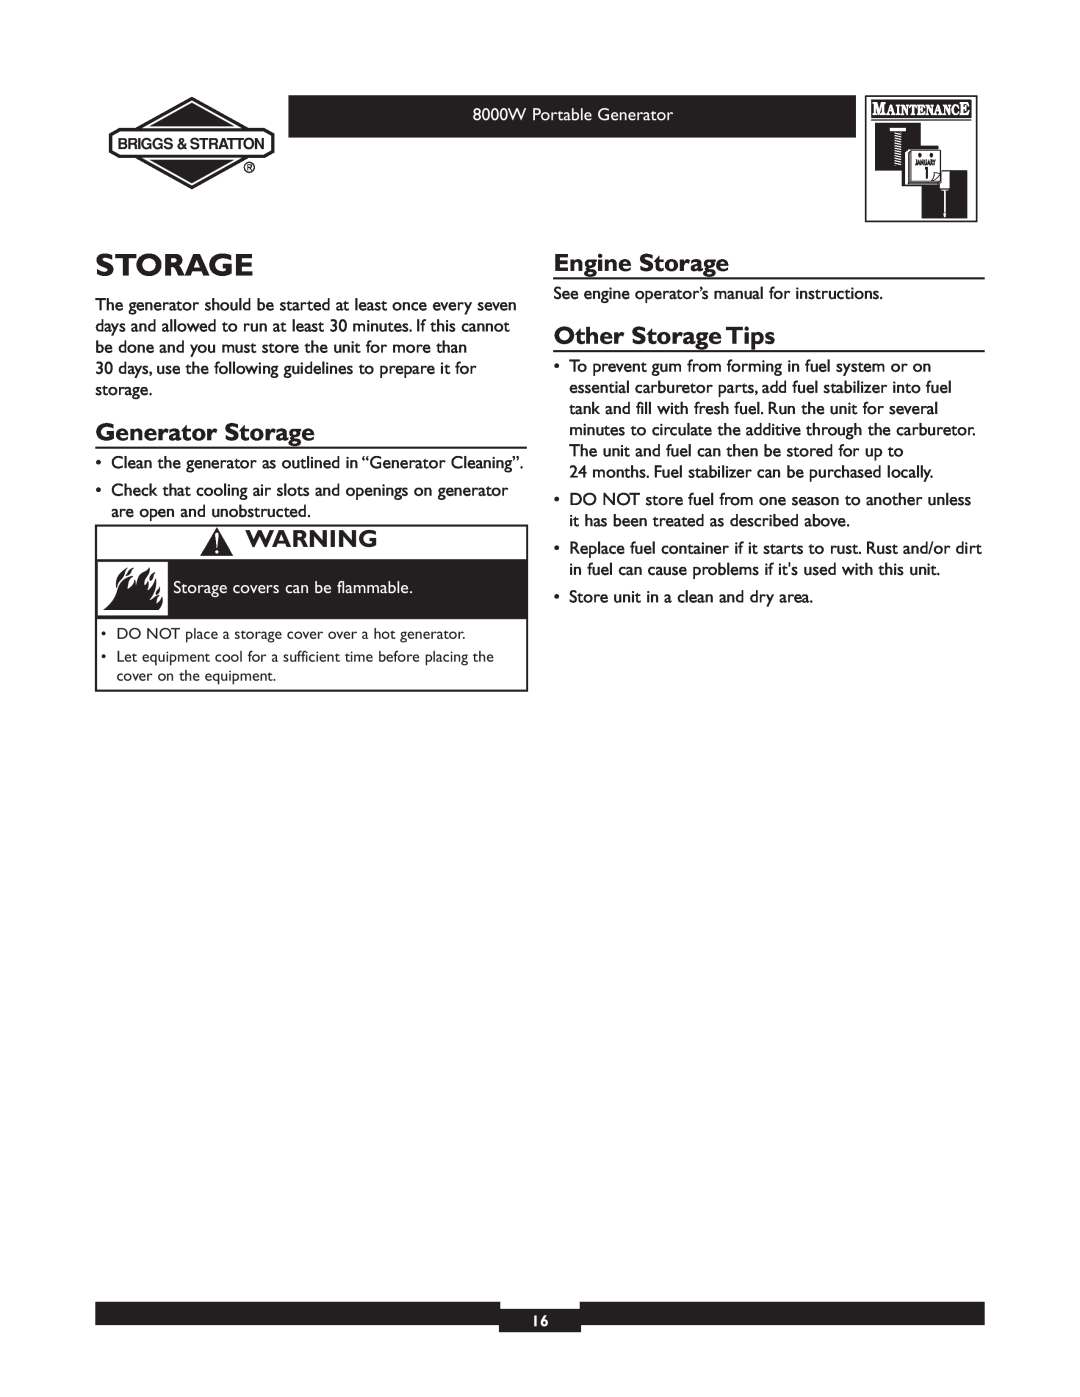 Briggs & Stratton 030210-2 Generator Storage, Engine Storage, Other Storage Tips, Storage covers can be flammable 